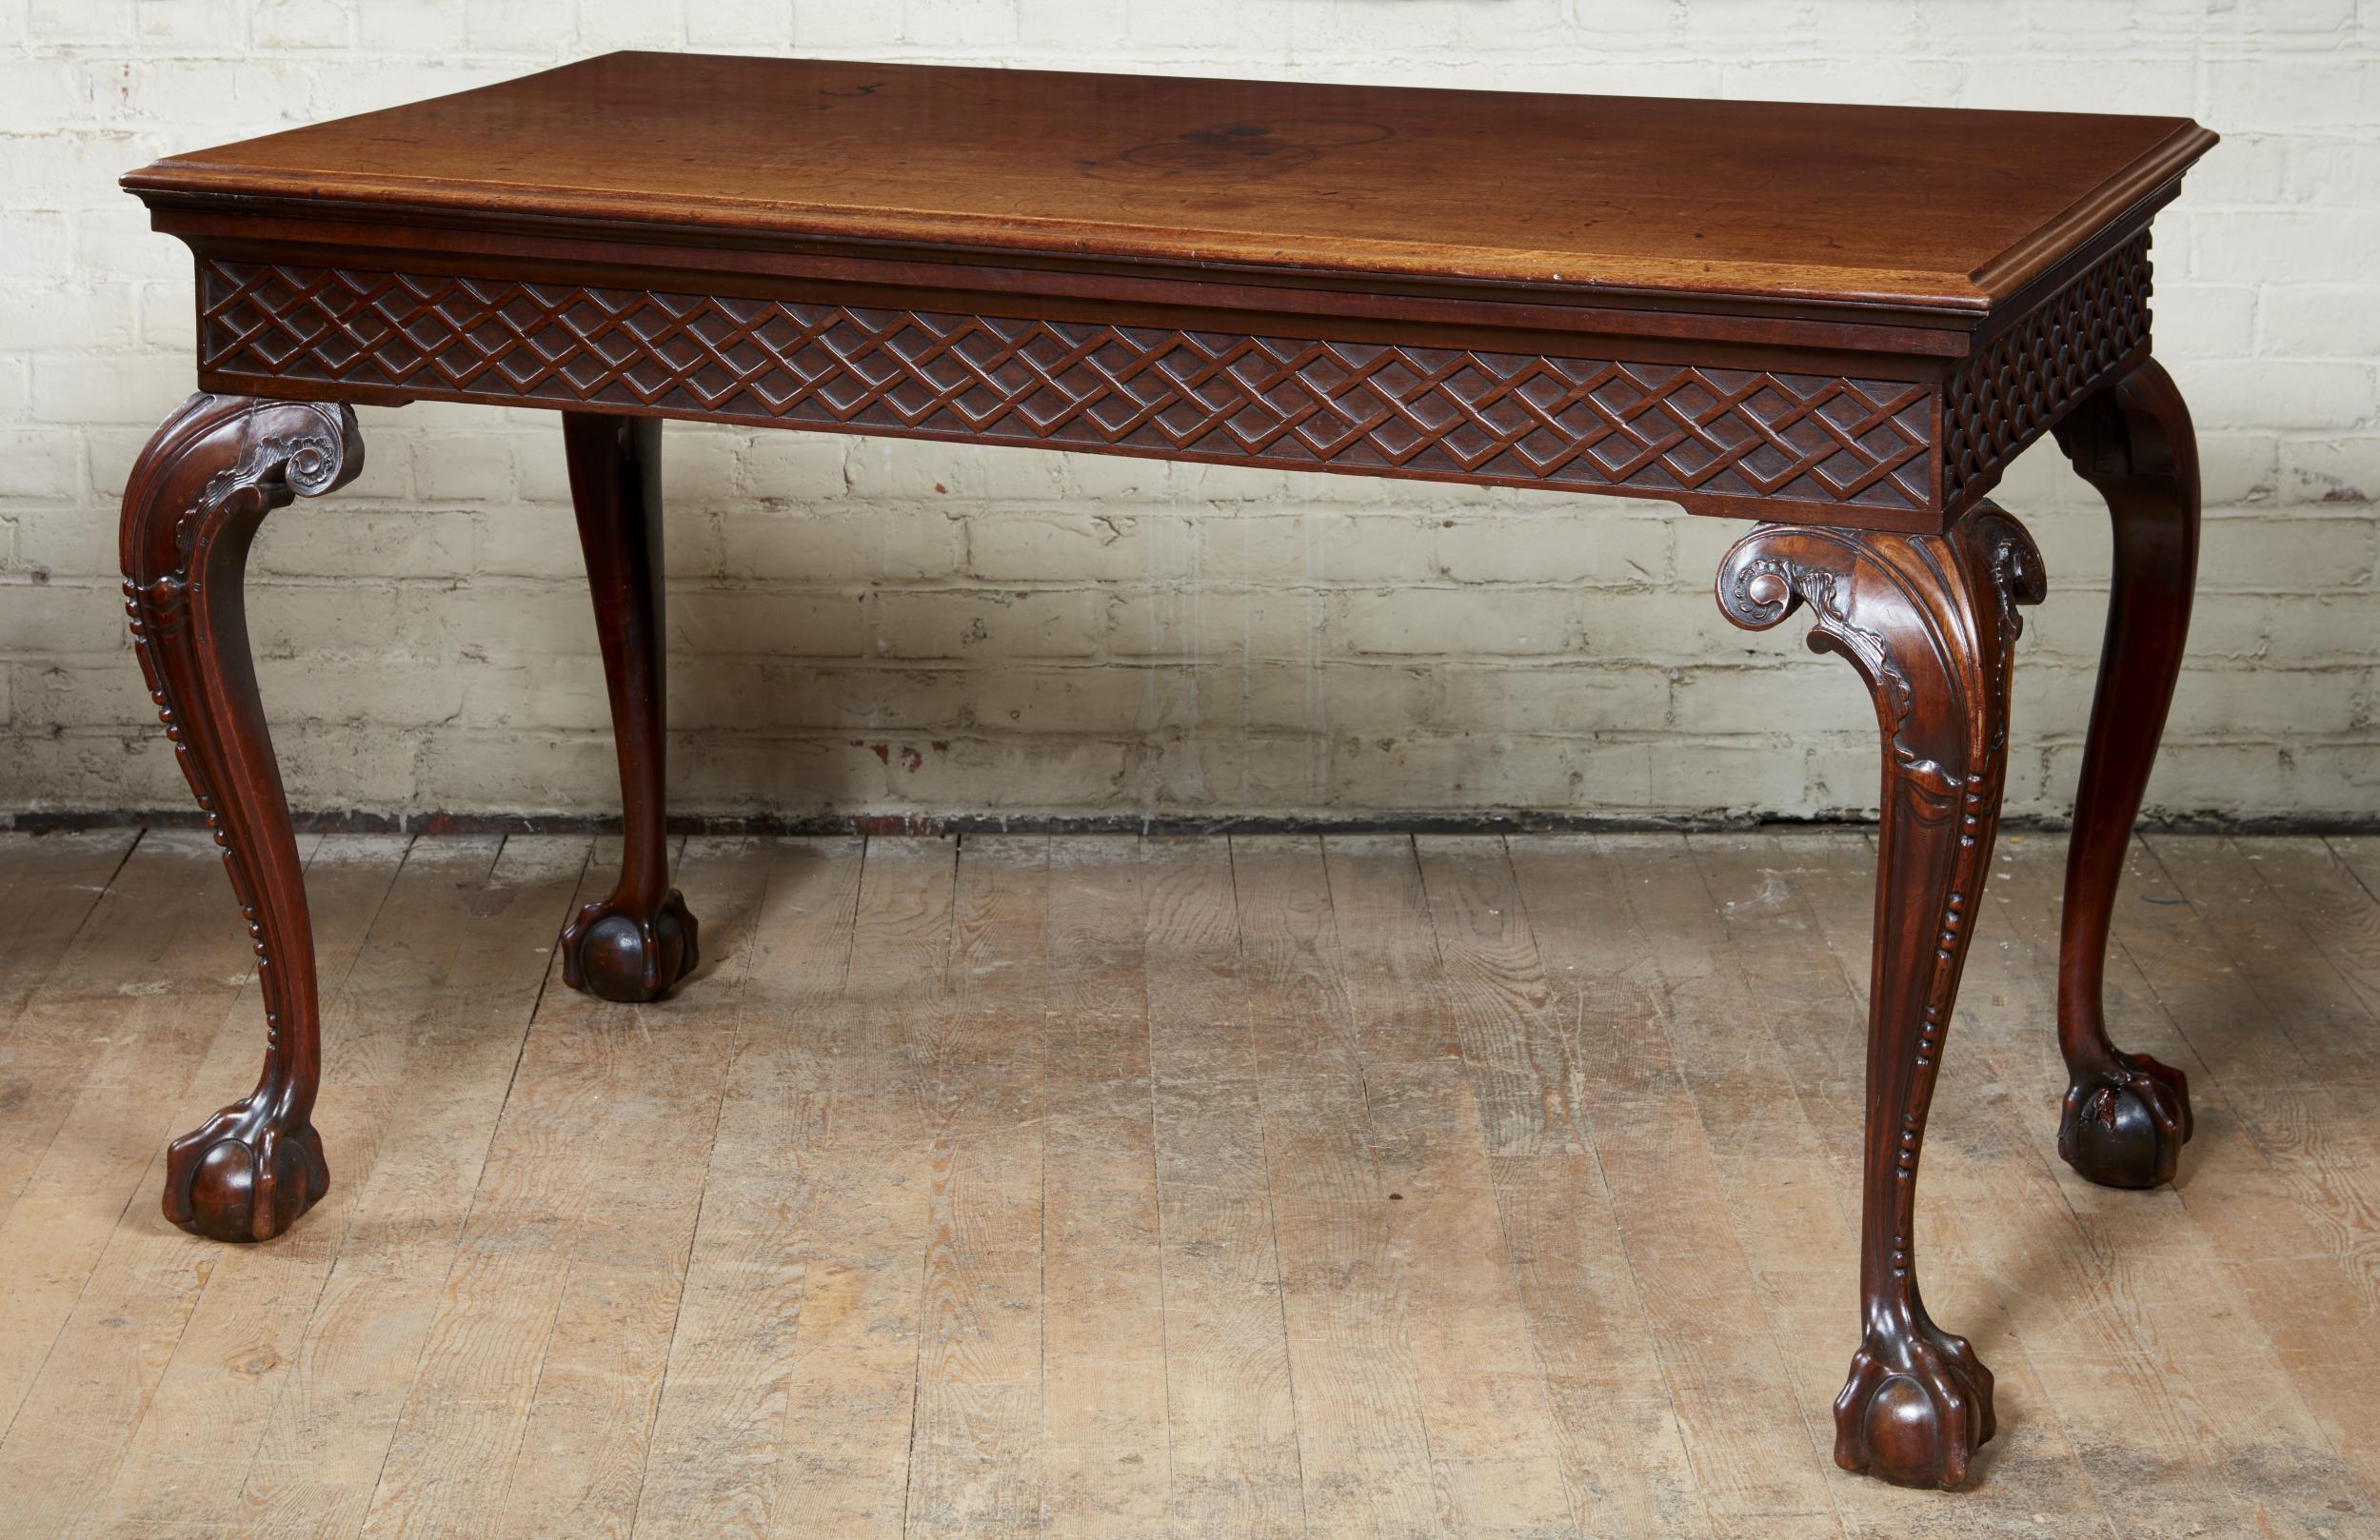 Very fine George II mahogany console table having a single plank top with molded edge over unusually carved blind fretwork apron and standing on boldly carved legs with rocaille carved knees and returns, beaded carved profile and well defined and